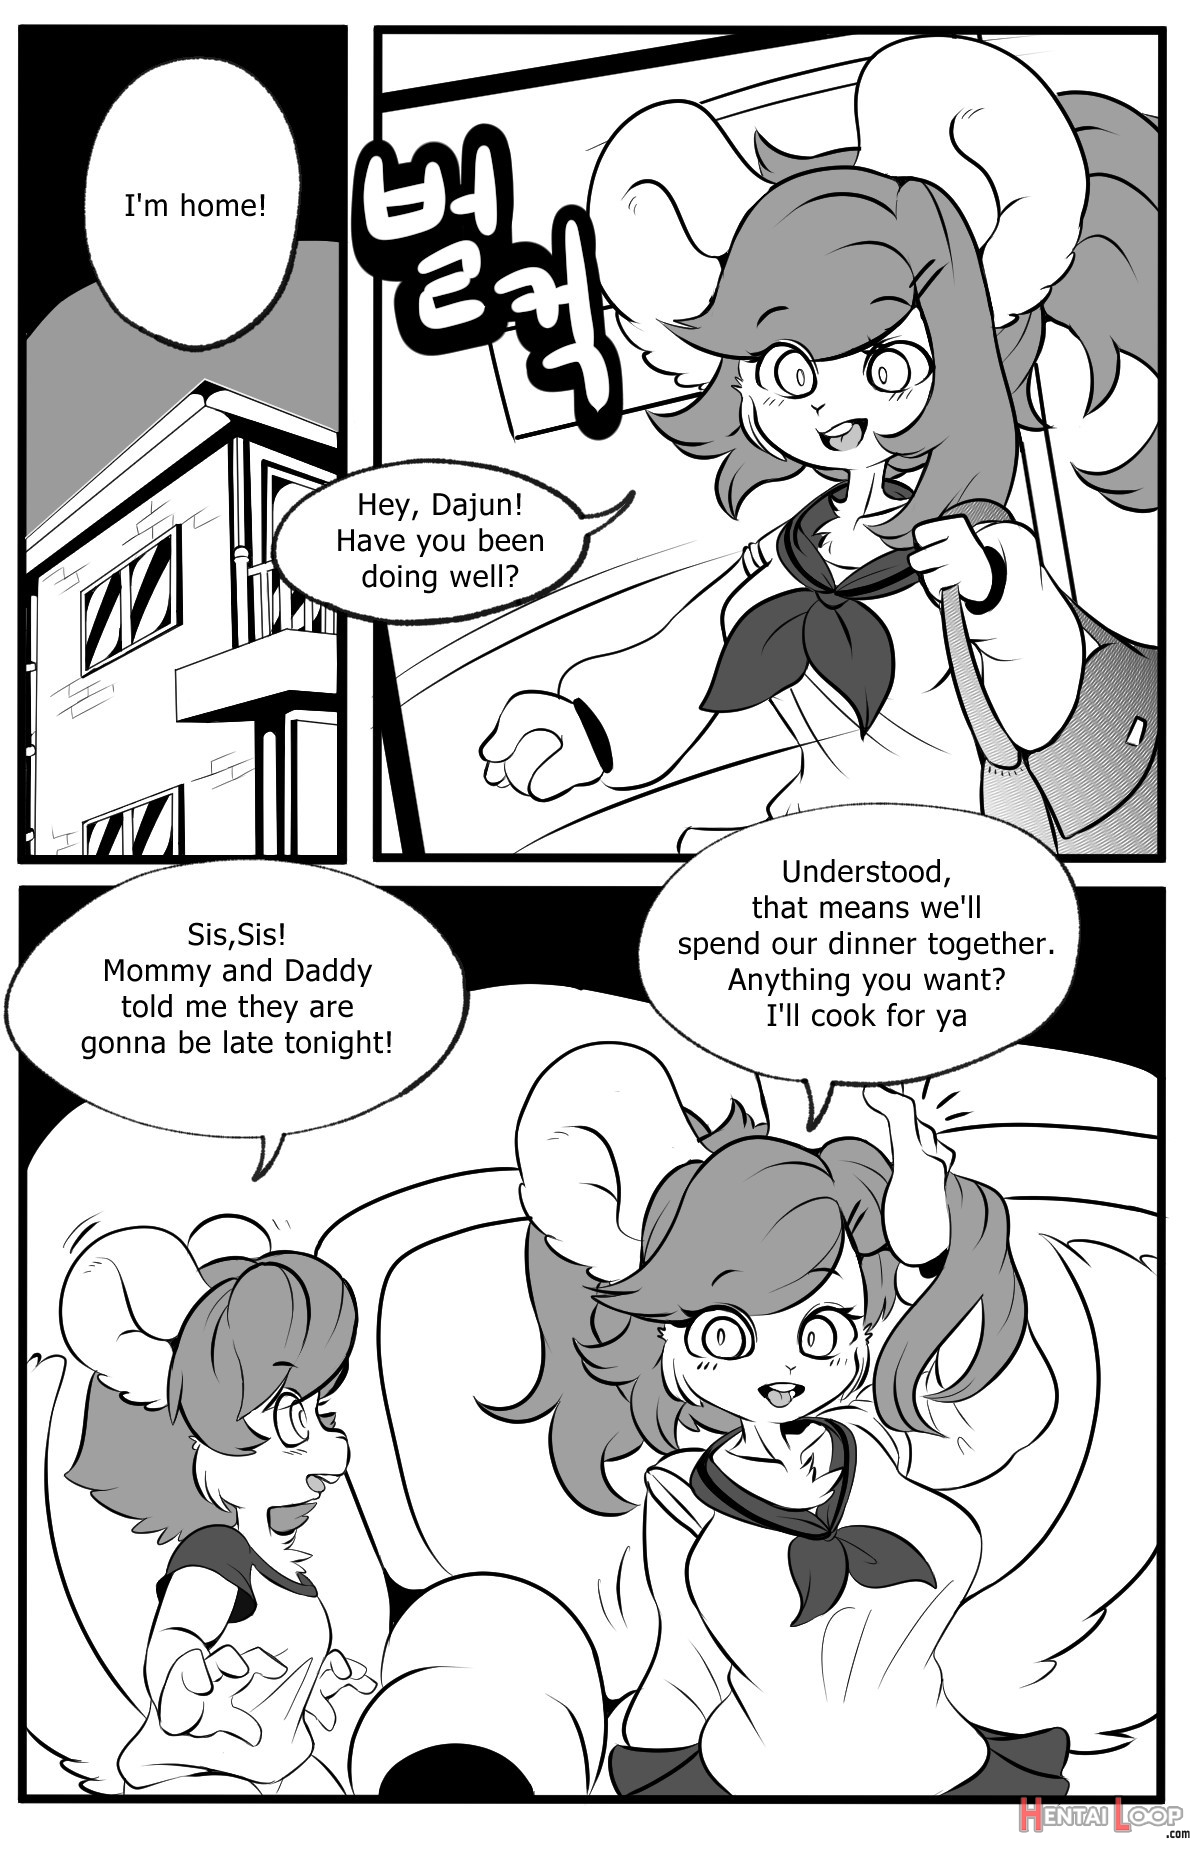 Playing Like Adult With Sister page 2